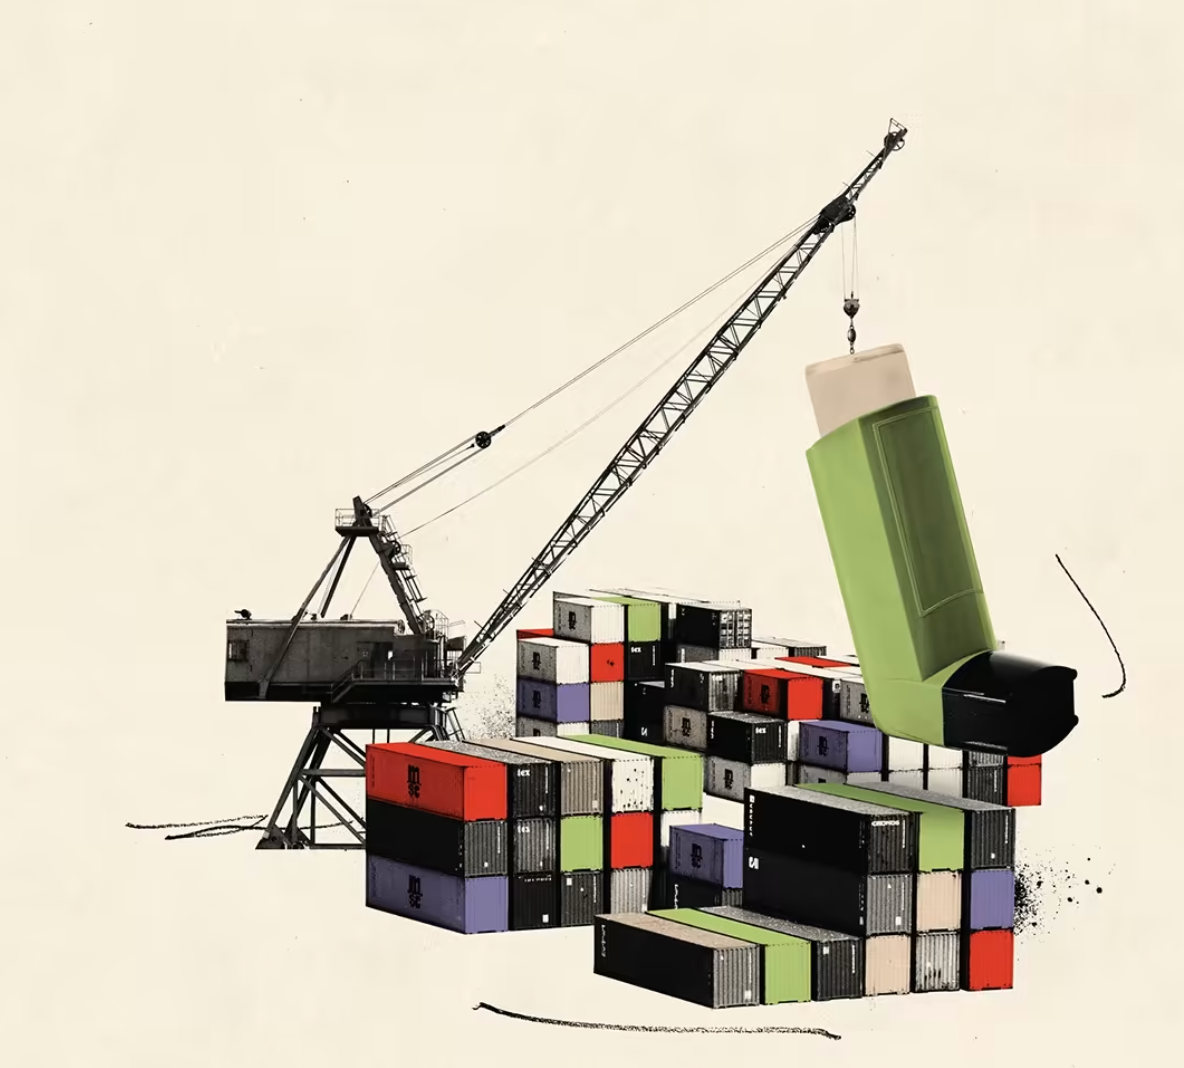 image of crane with canisters